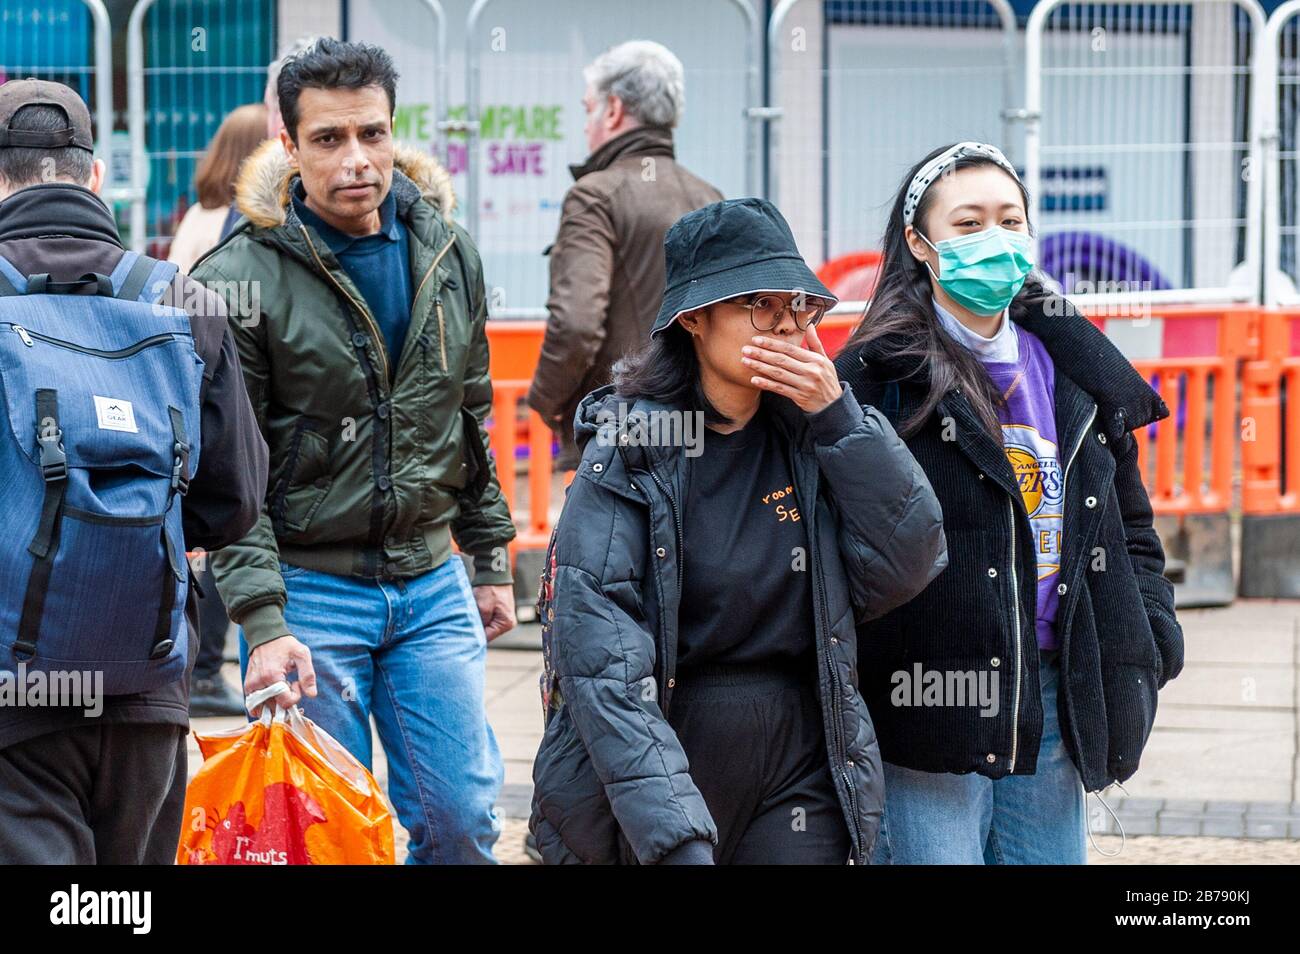 Coventry, West Midlands, UK. 14th Mar, 2020. The Coronavirus pandemic forced shoppers to wear protective masks in Coventry city centre this afternoon. Credit: Andy Gibson/Alamy Live News Stock Photo